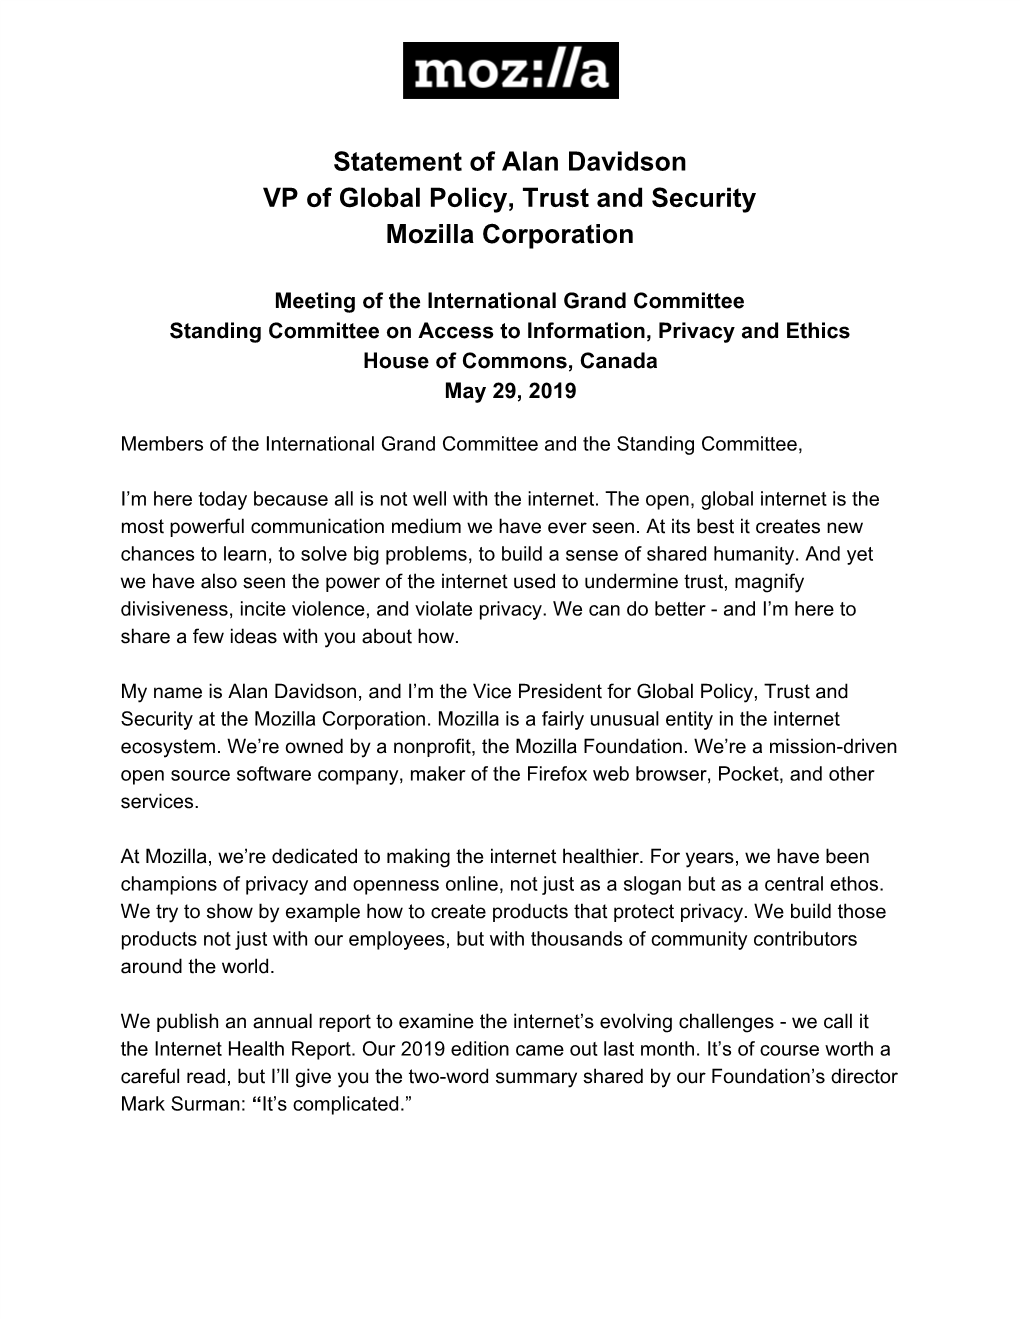 Statement of Alan Davidson VP of Global Policy, Trust and Security Mozilla Corporation